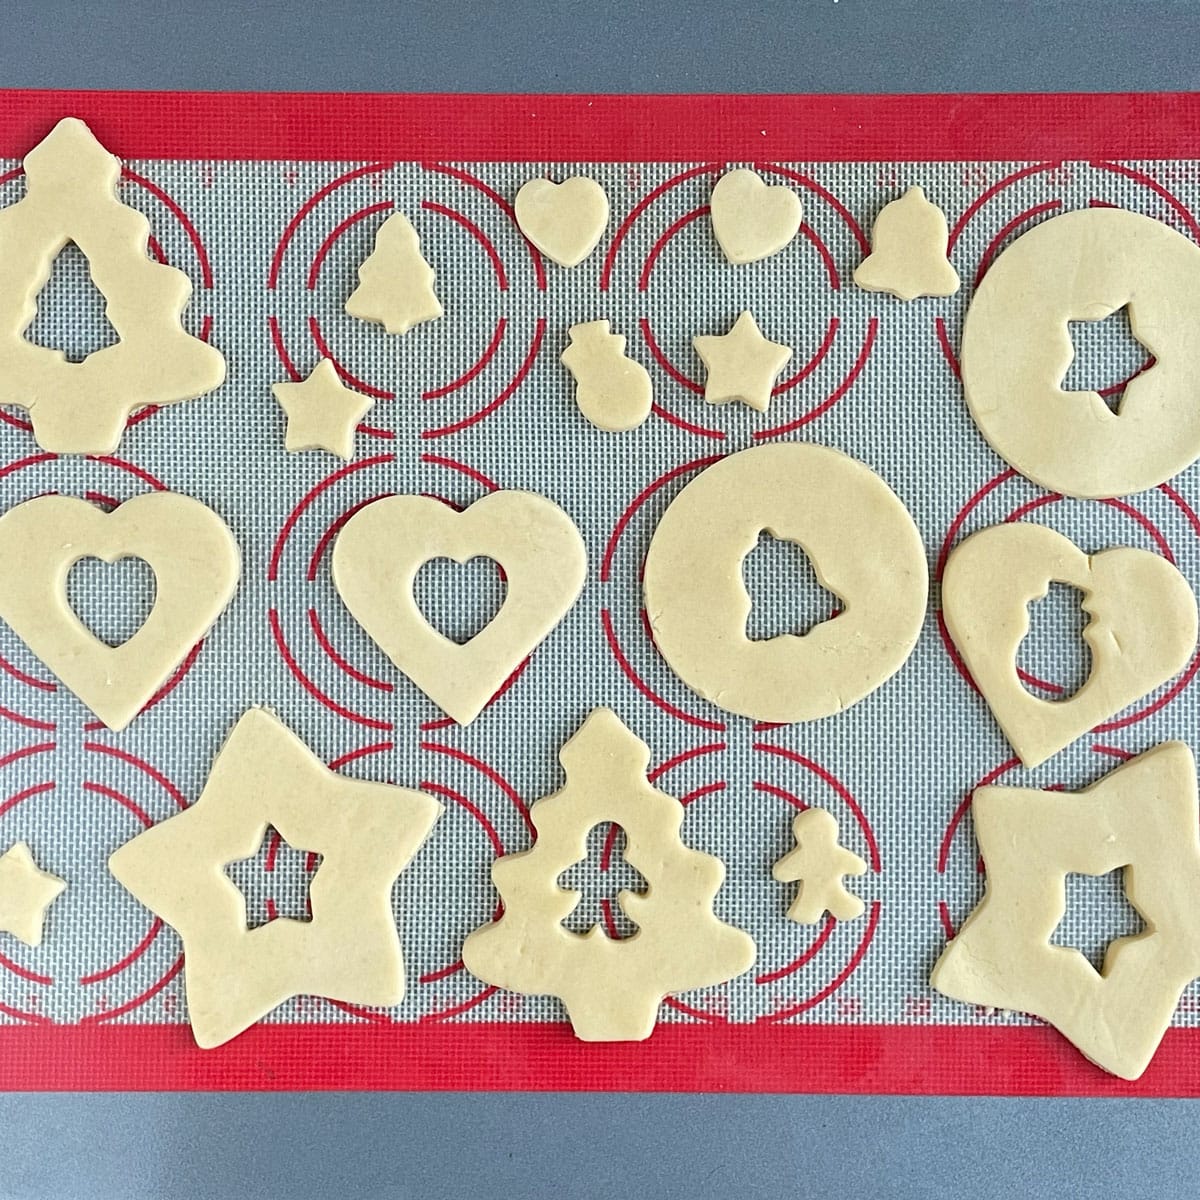 Various Cookie shapes in a tray for baking.